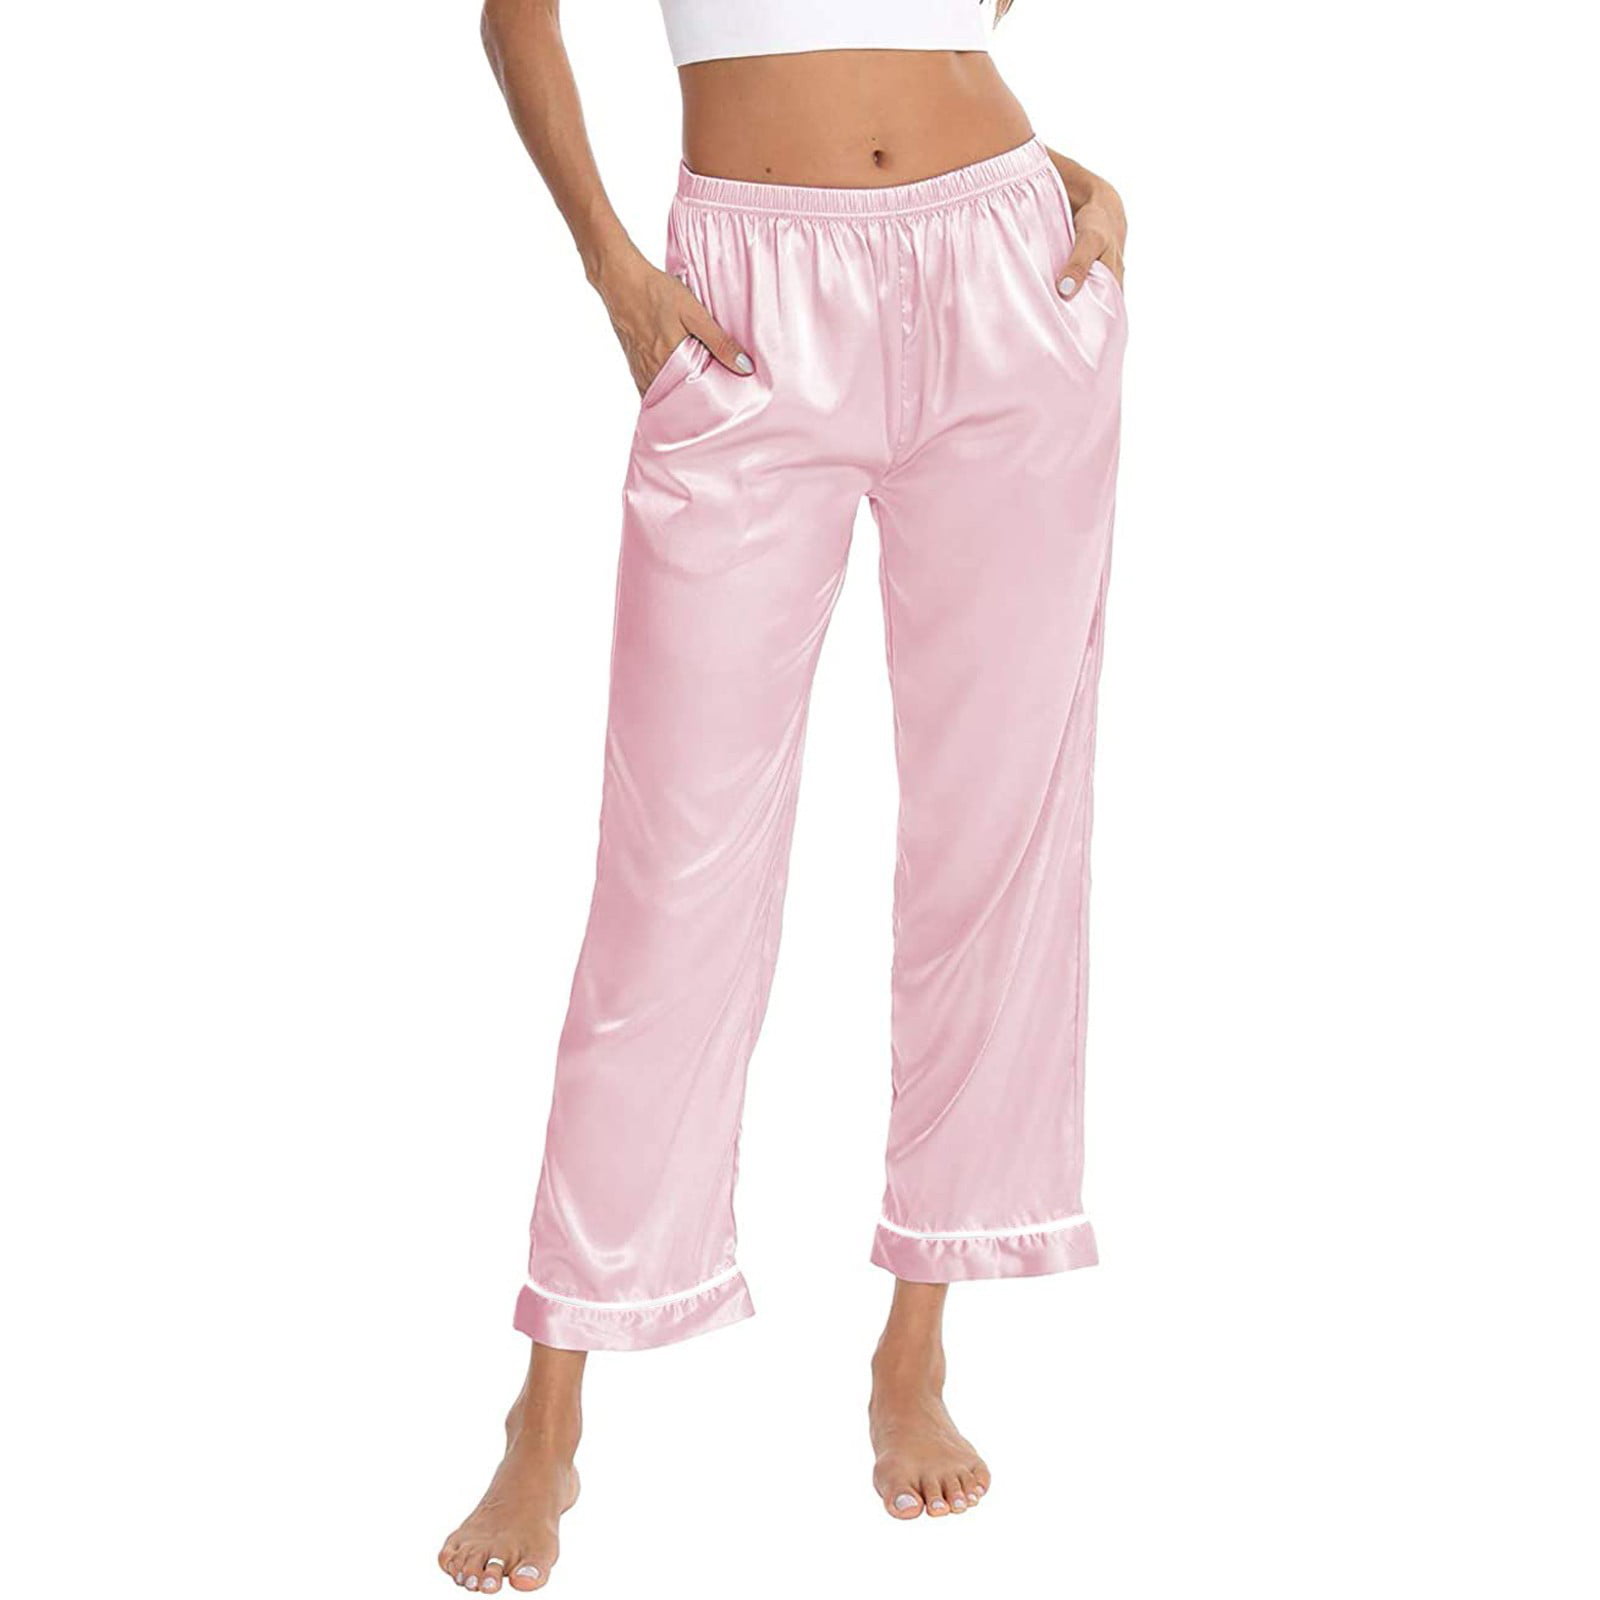 Loungeable Satin Pajama Pants With Lace Trim In Raspberry Part Of